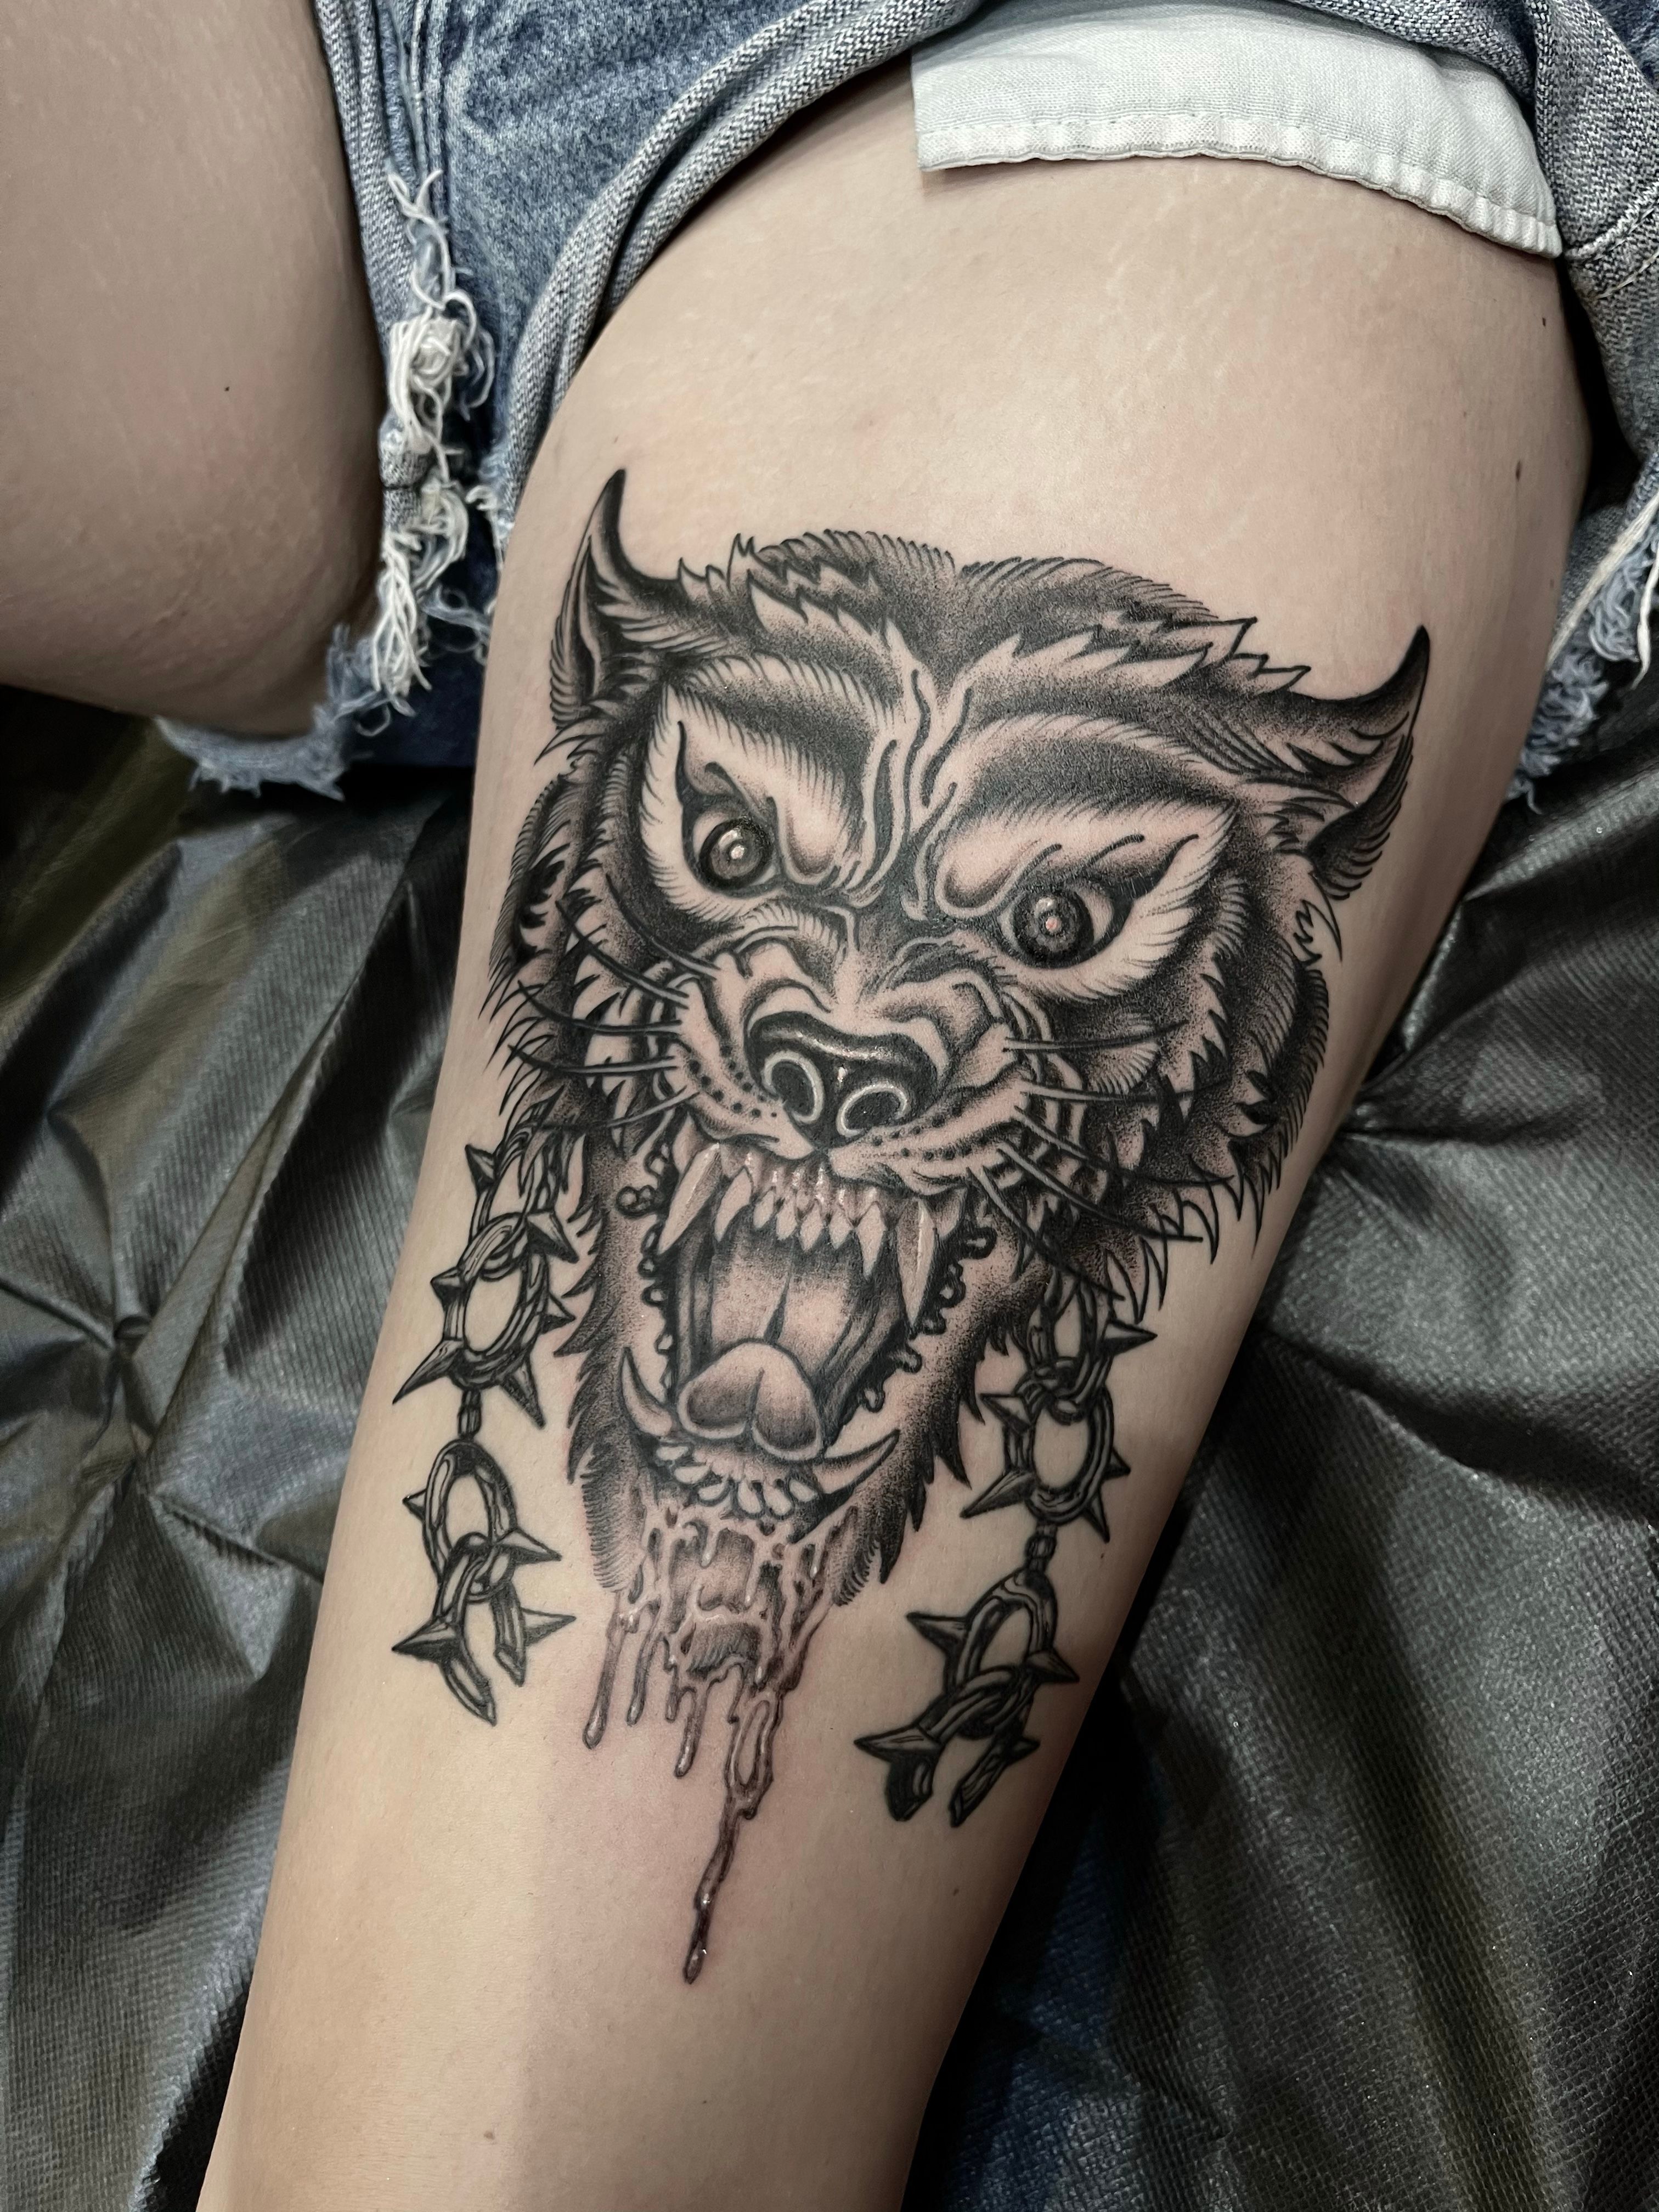 11 Wolf Head Tattoo Ideas You Have To See To Believe  alexie